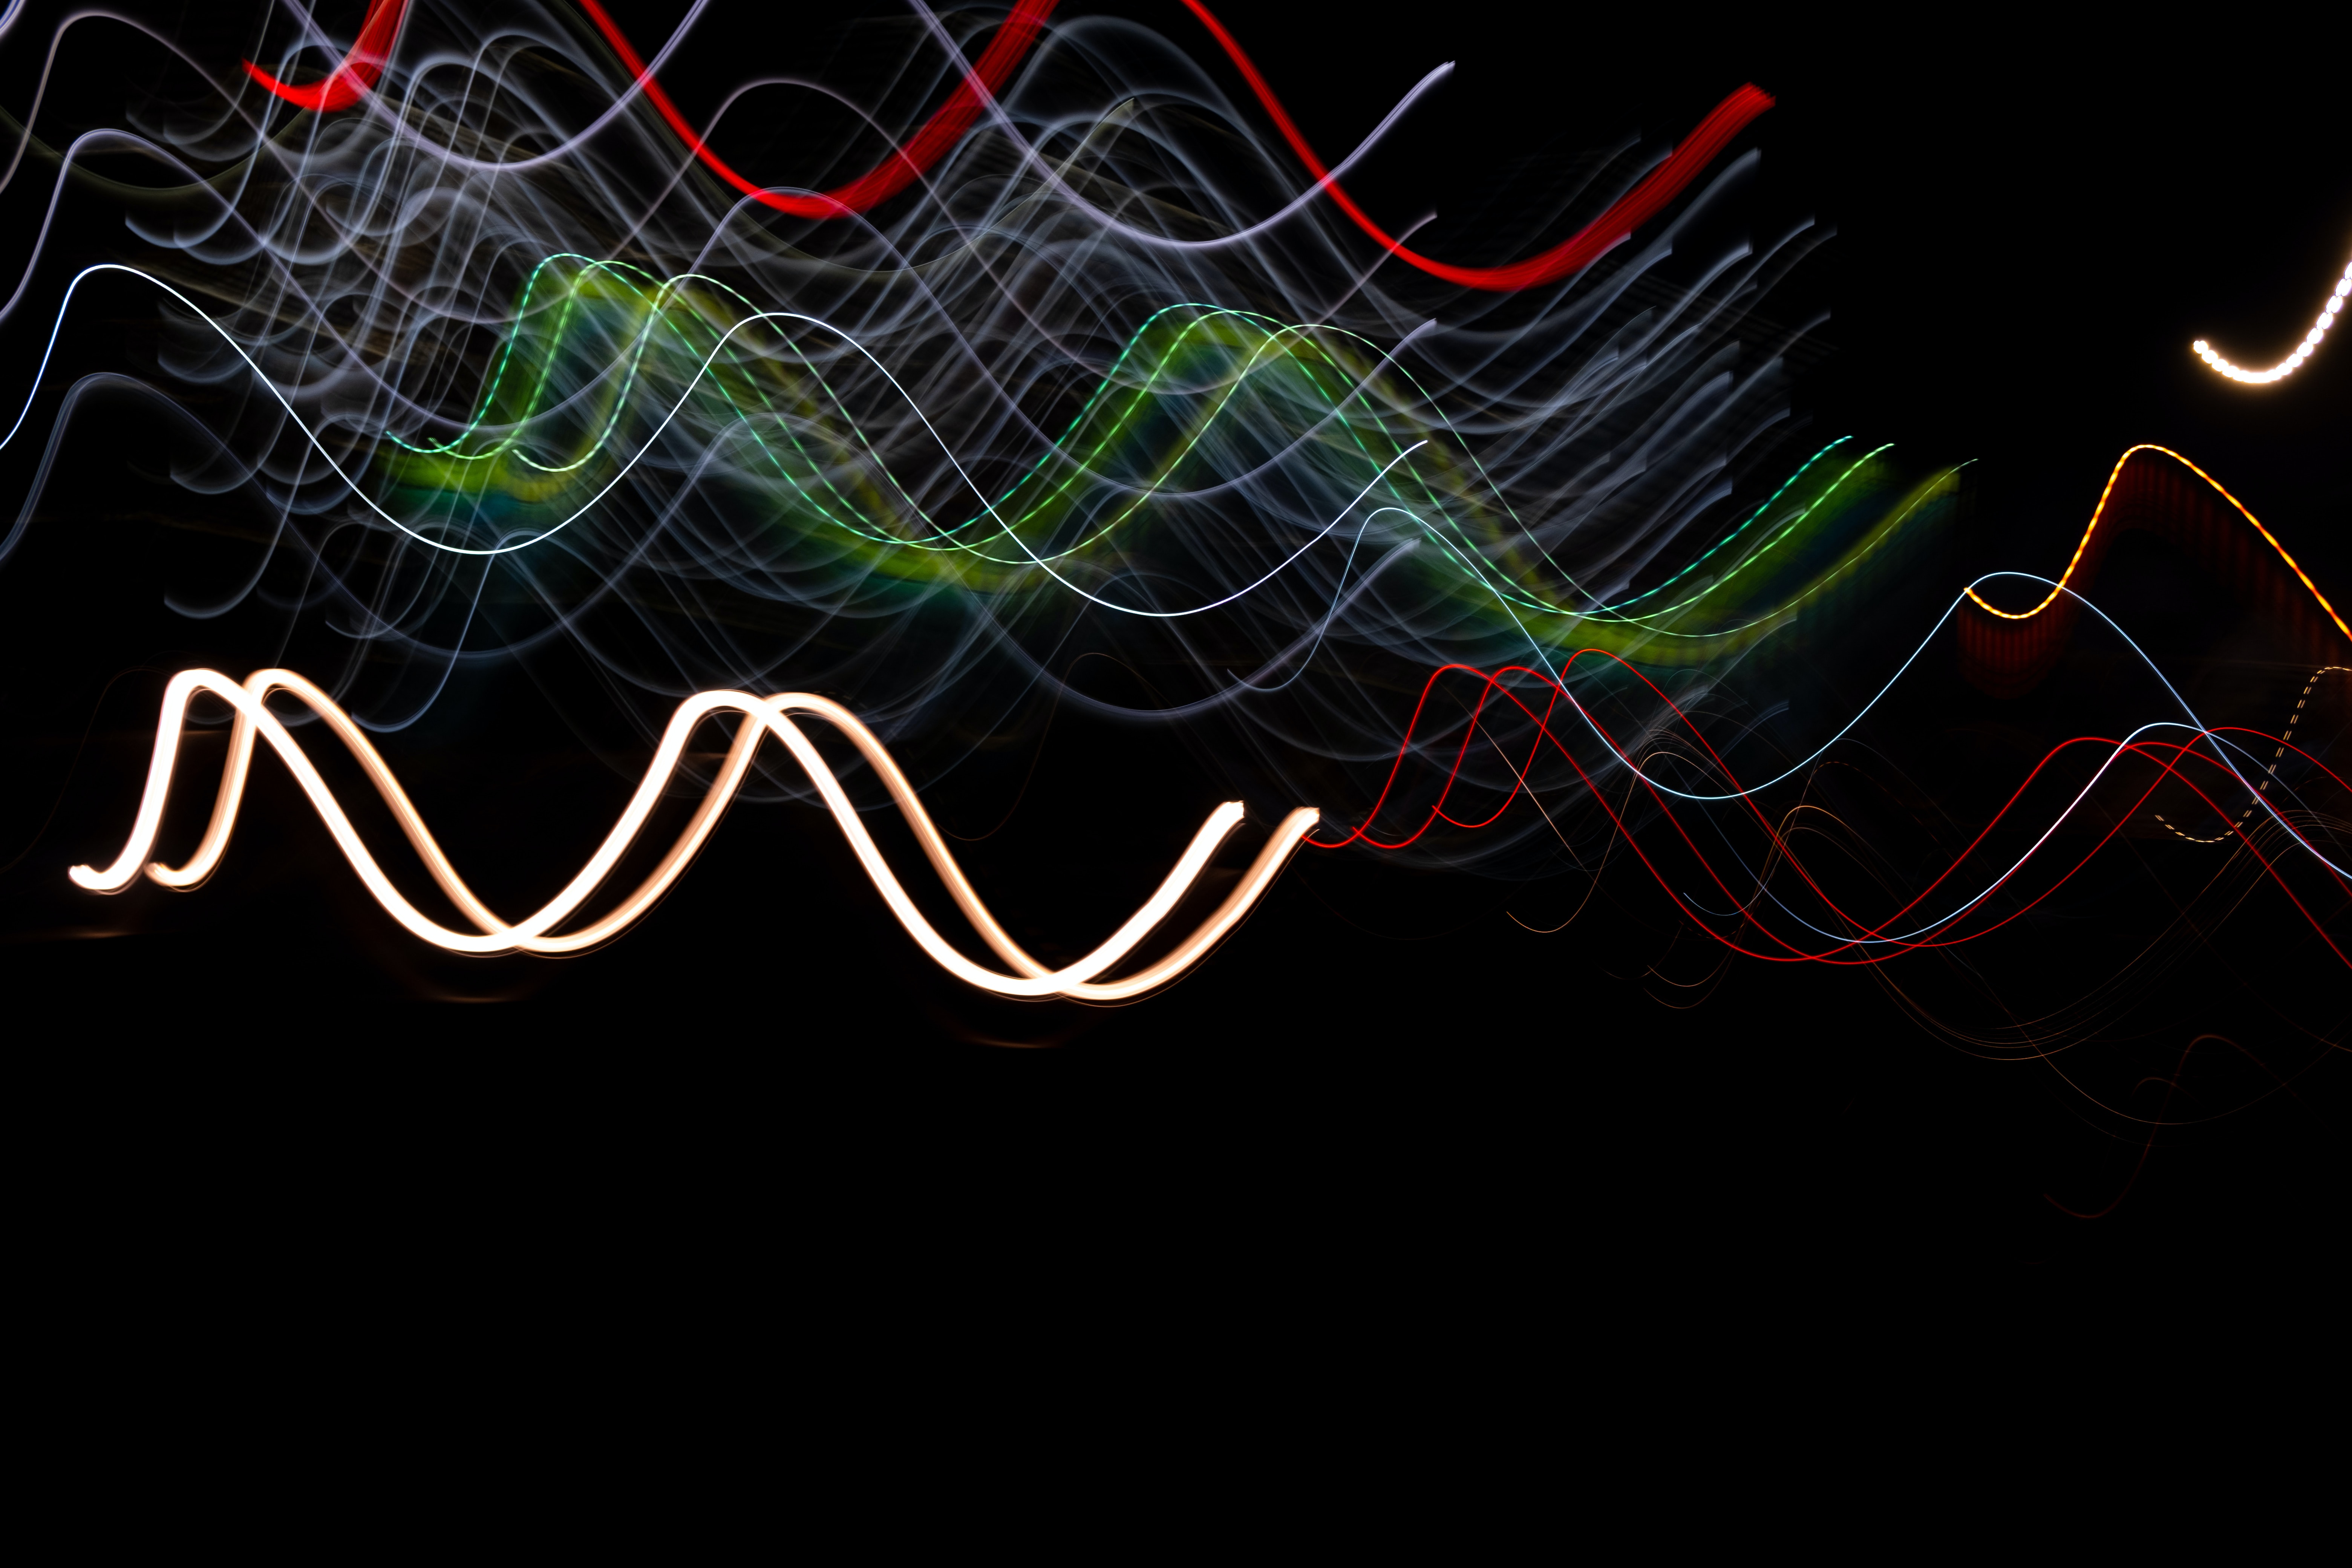 A series of wavy lines on a black background